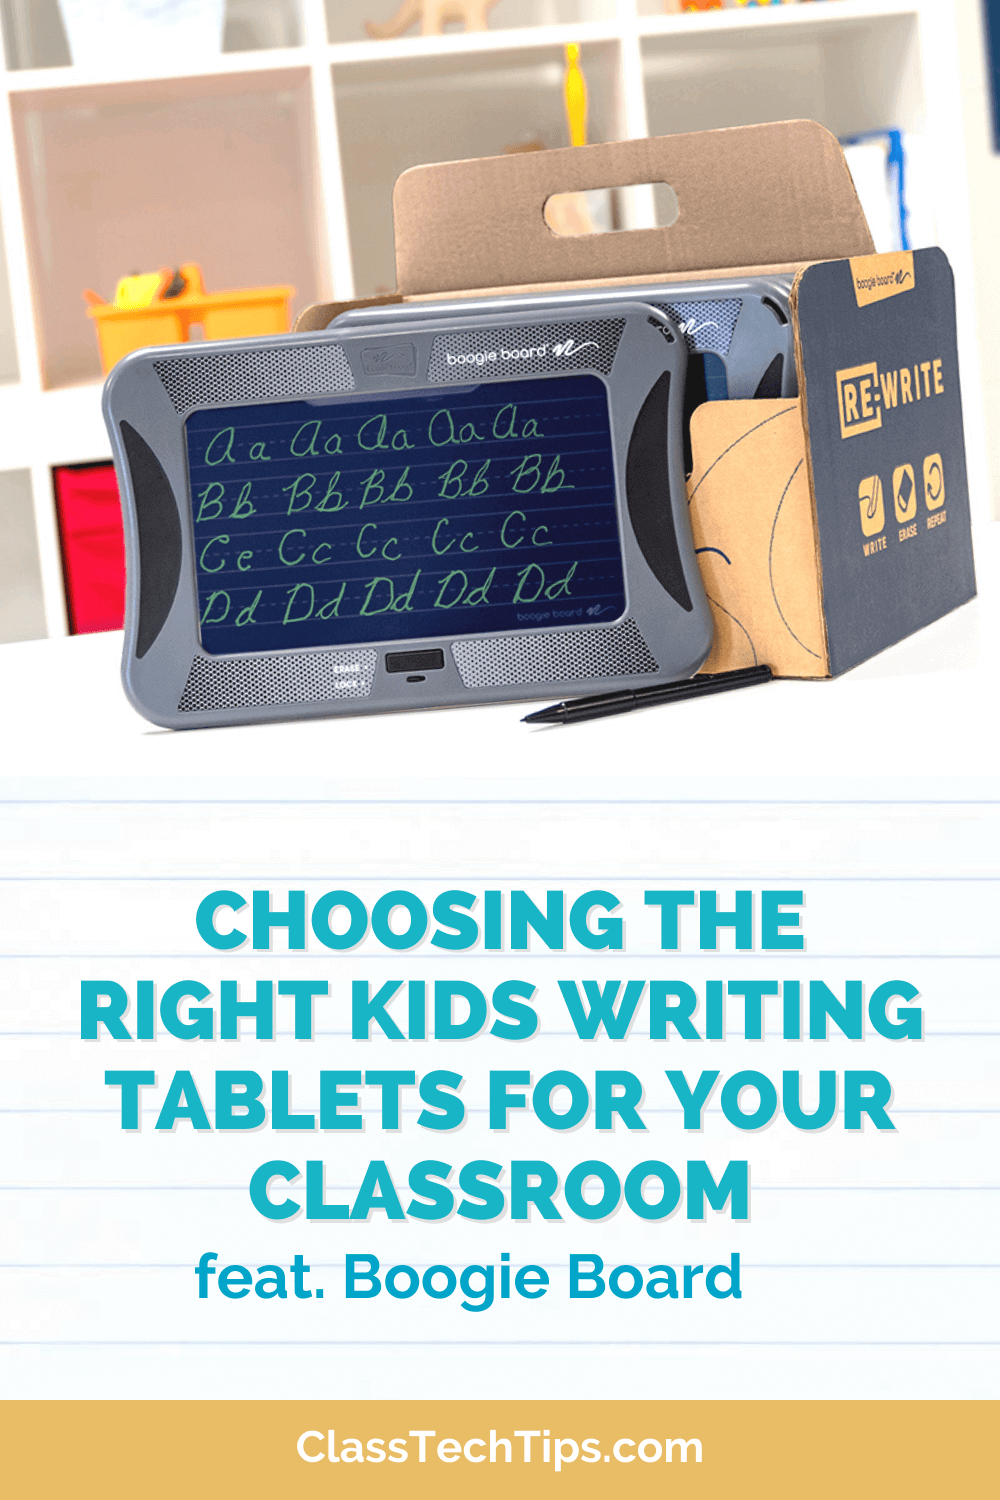 Kids writing tablet from Boogie Board placed on a desk, highlighting an effective, tech-savvy tool for student writing in the classroom.